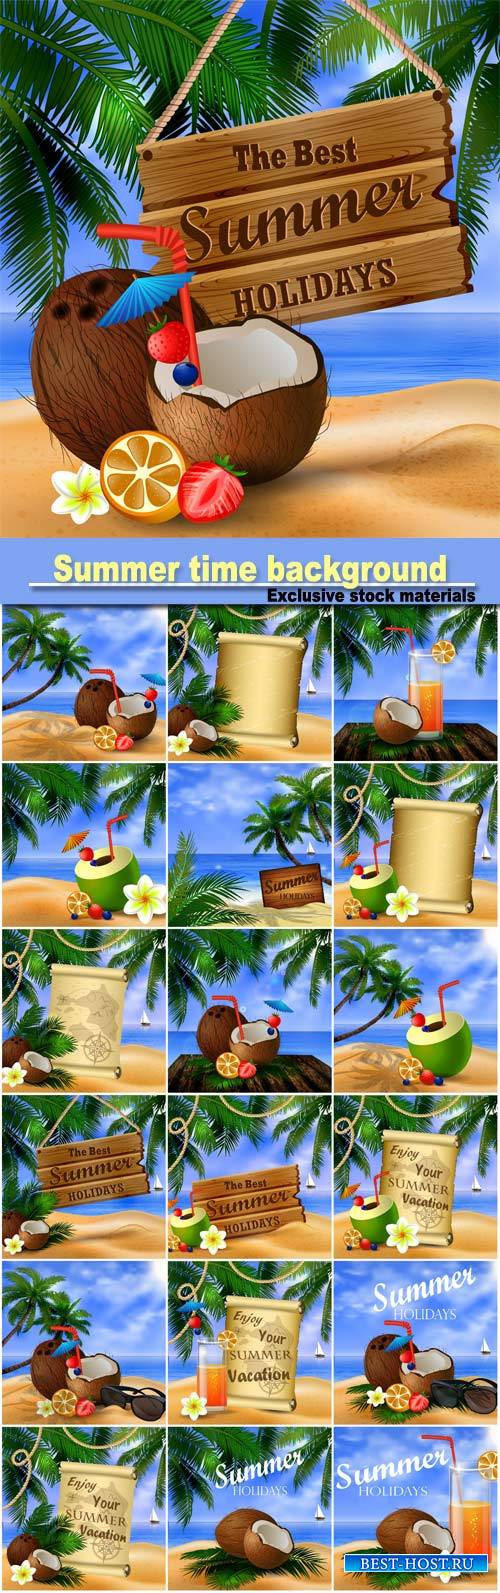 Summer time background with sea views, cocktails